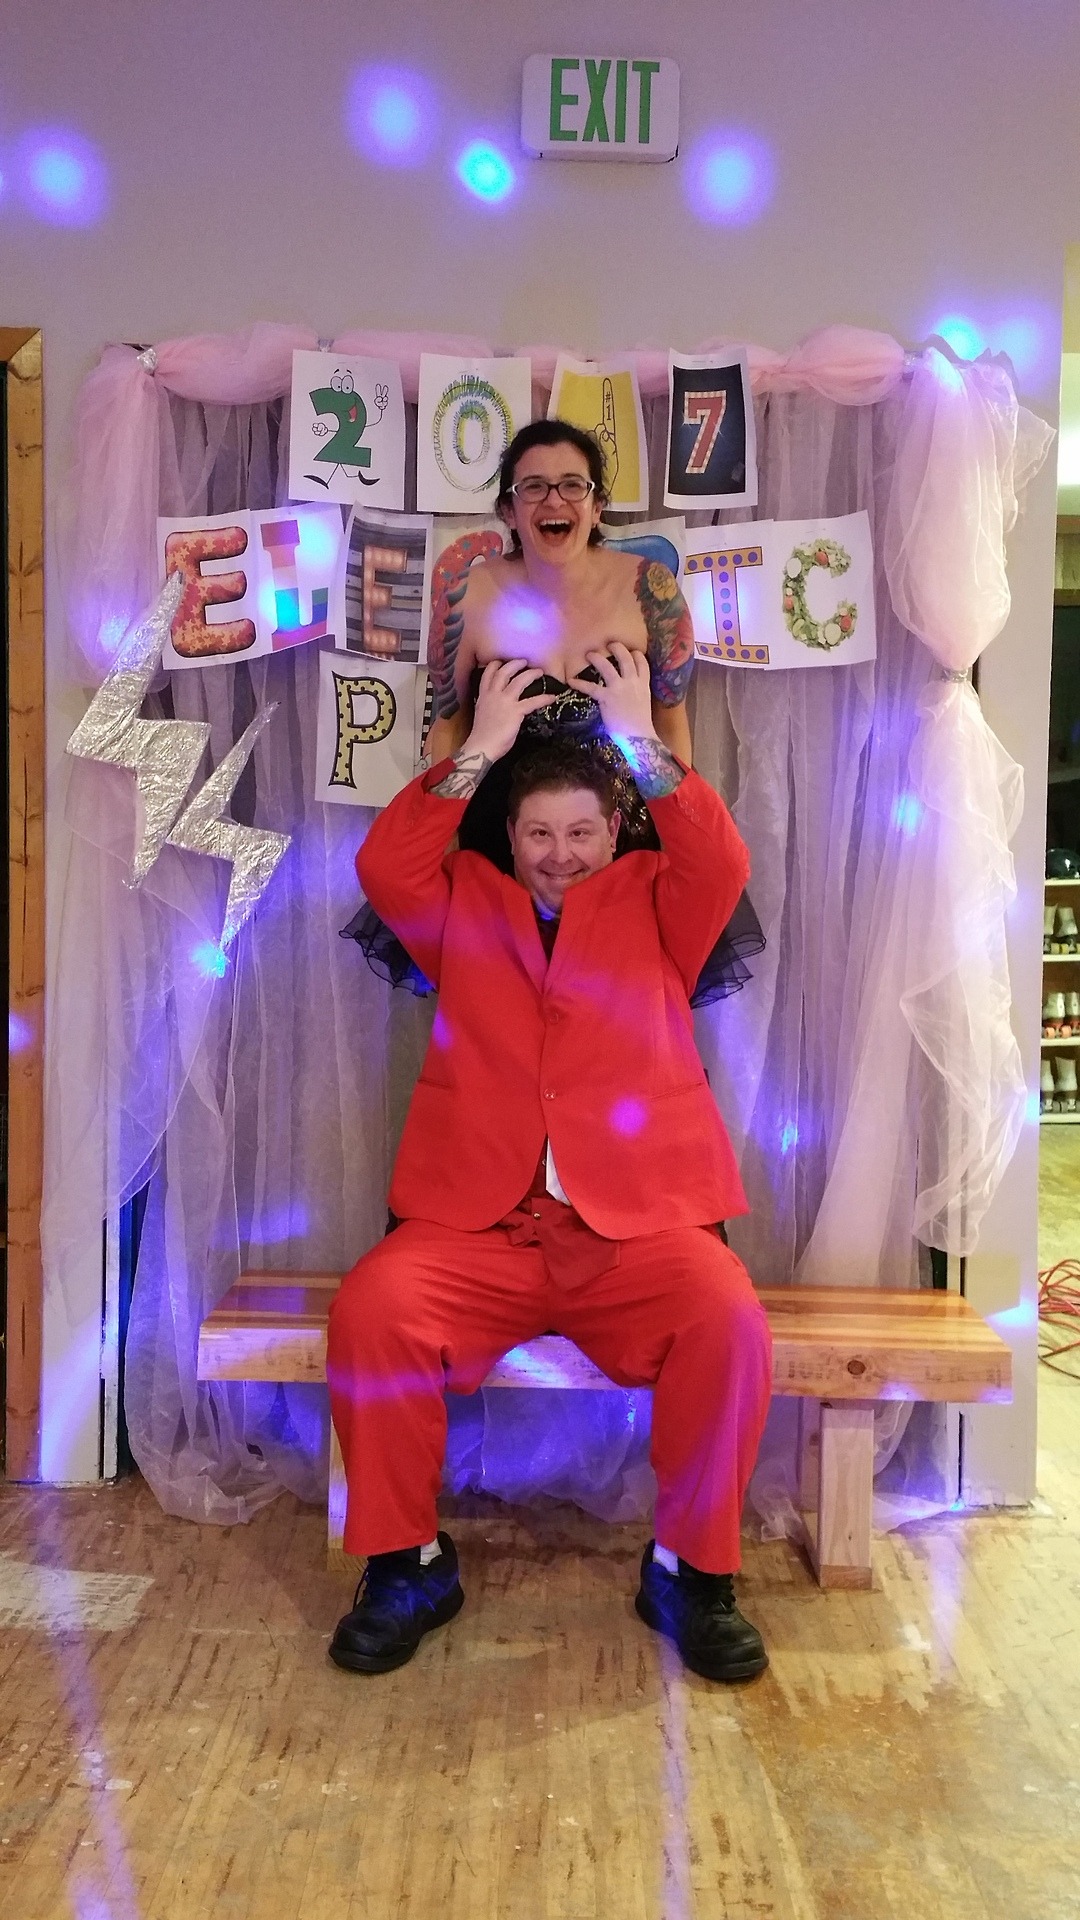 skella-whore:  Prom was so silly and fun! This was the first time that evil-sin’s